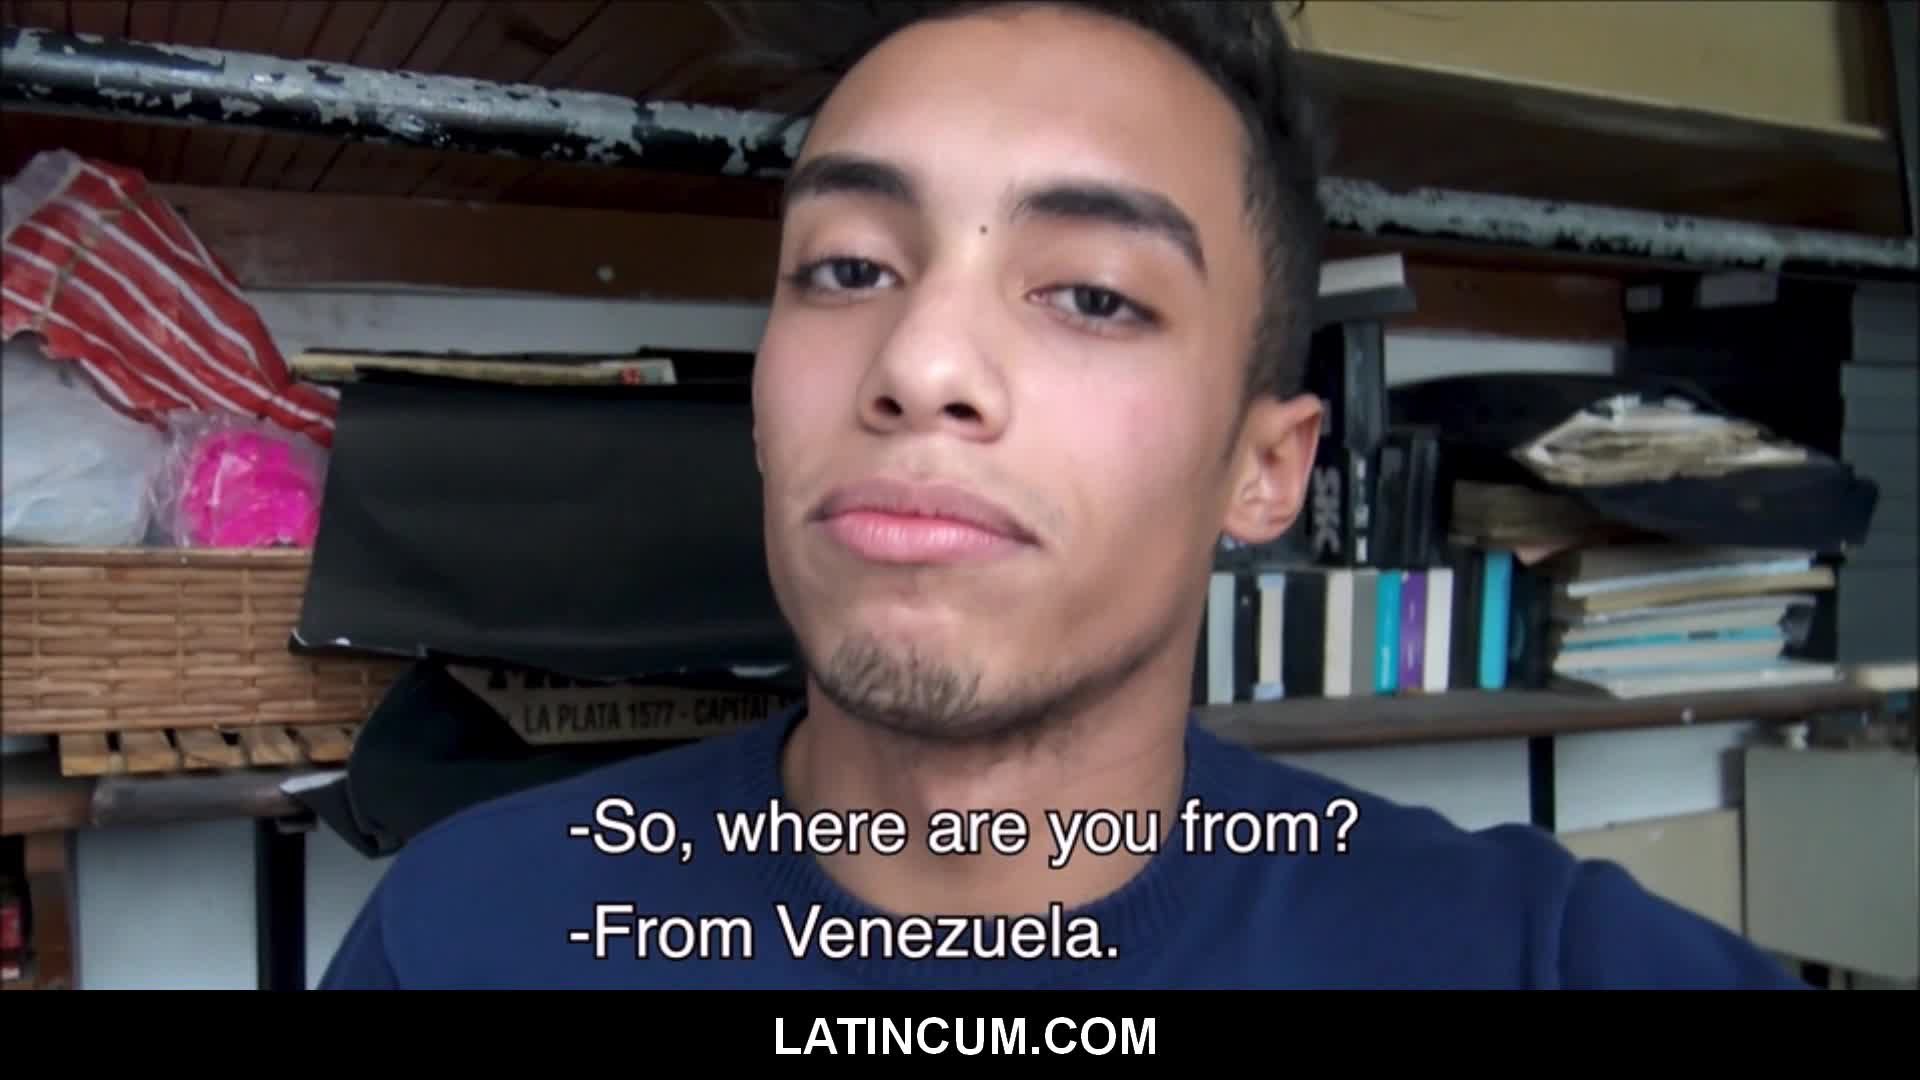 Straight Amateur Latino Twink With Braces Paid To Fuck And Suck Gay Stranger Pov